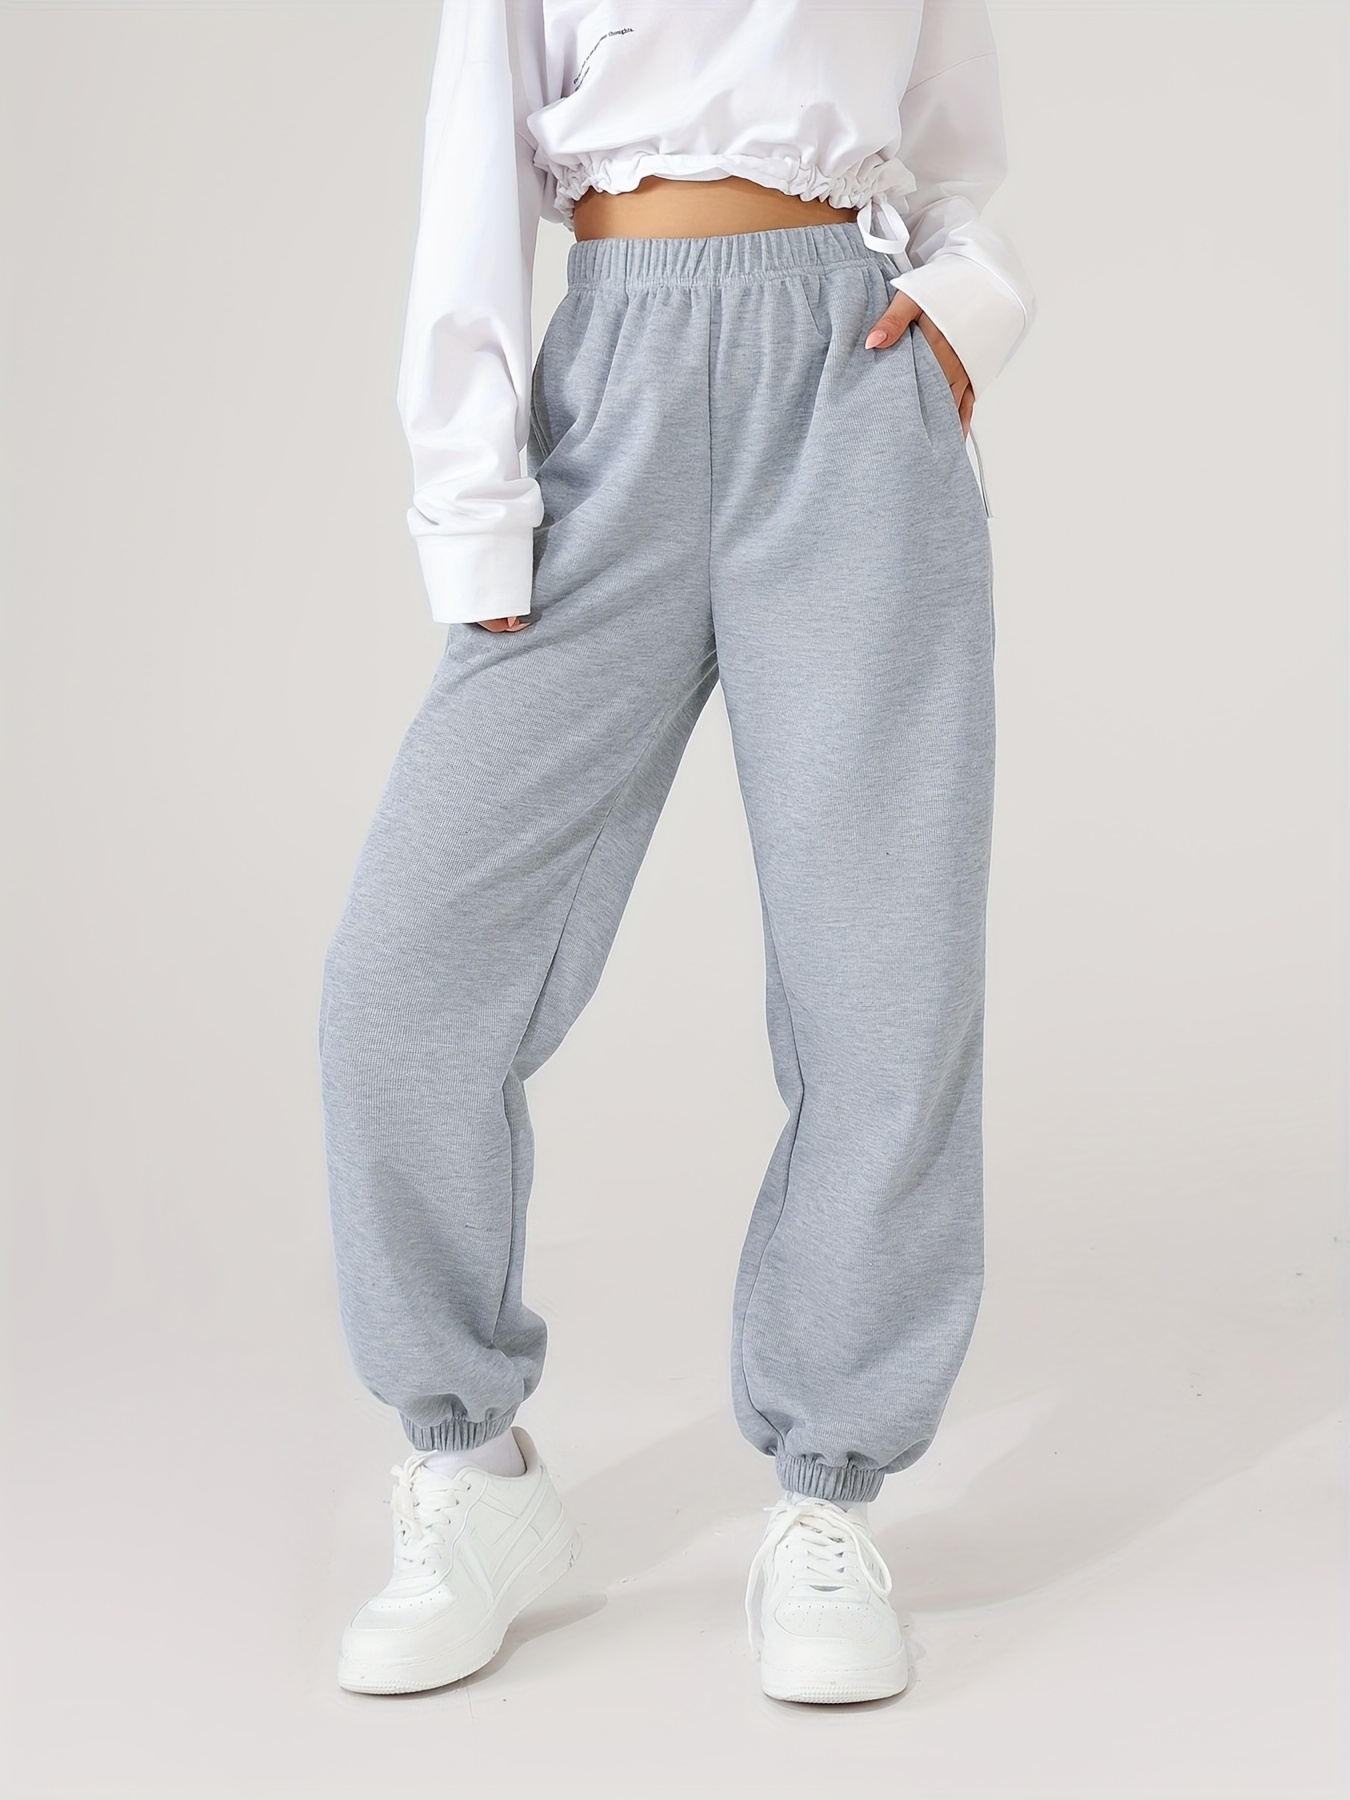 Baggy Sweatpants for Womens Sporty Gym Clothes Cuffed Athletic Sweat Pants  with Pockets Sweatpant Women